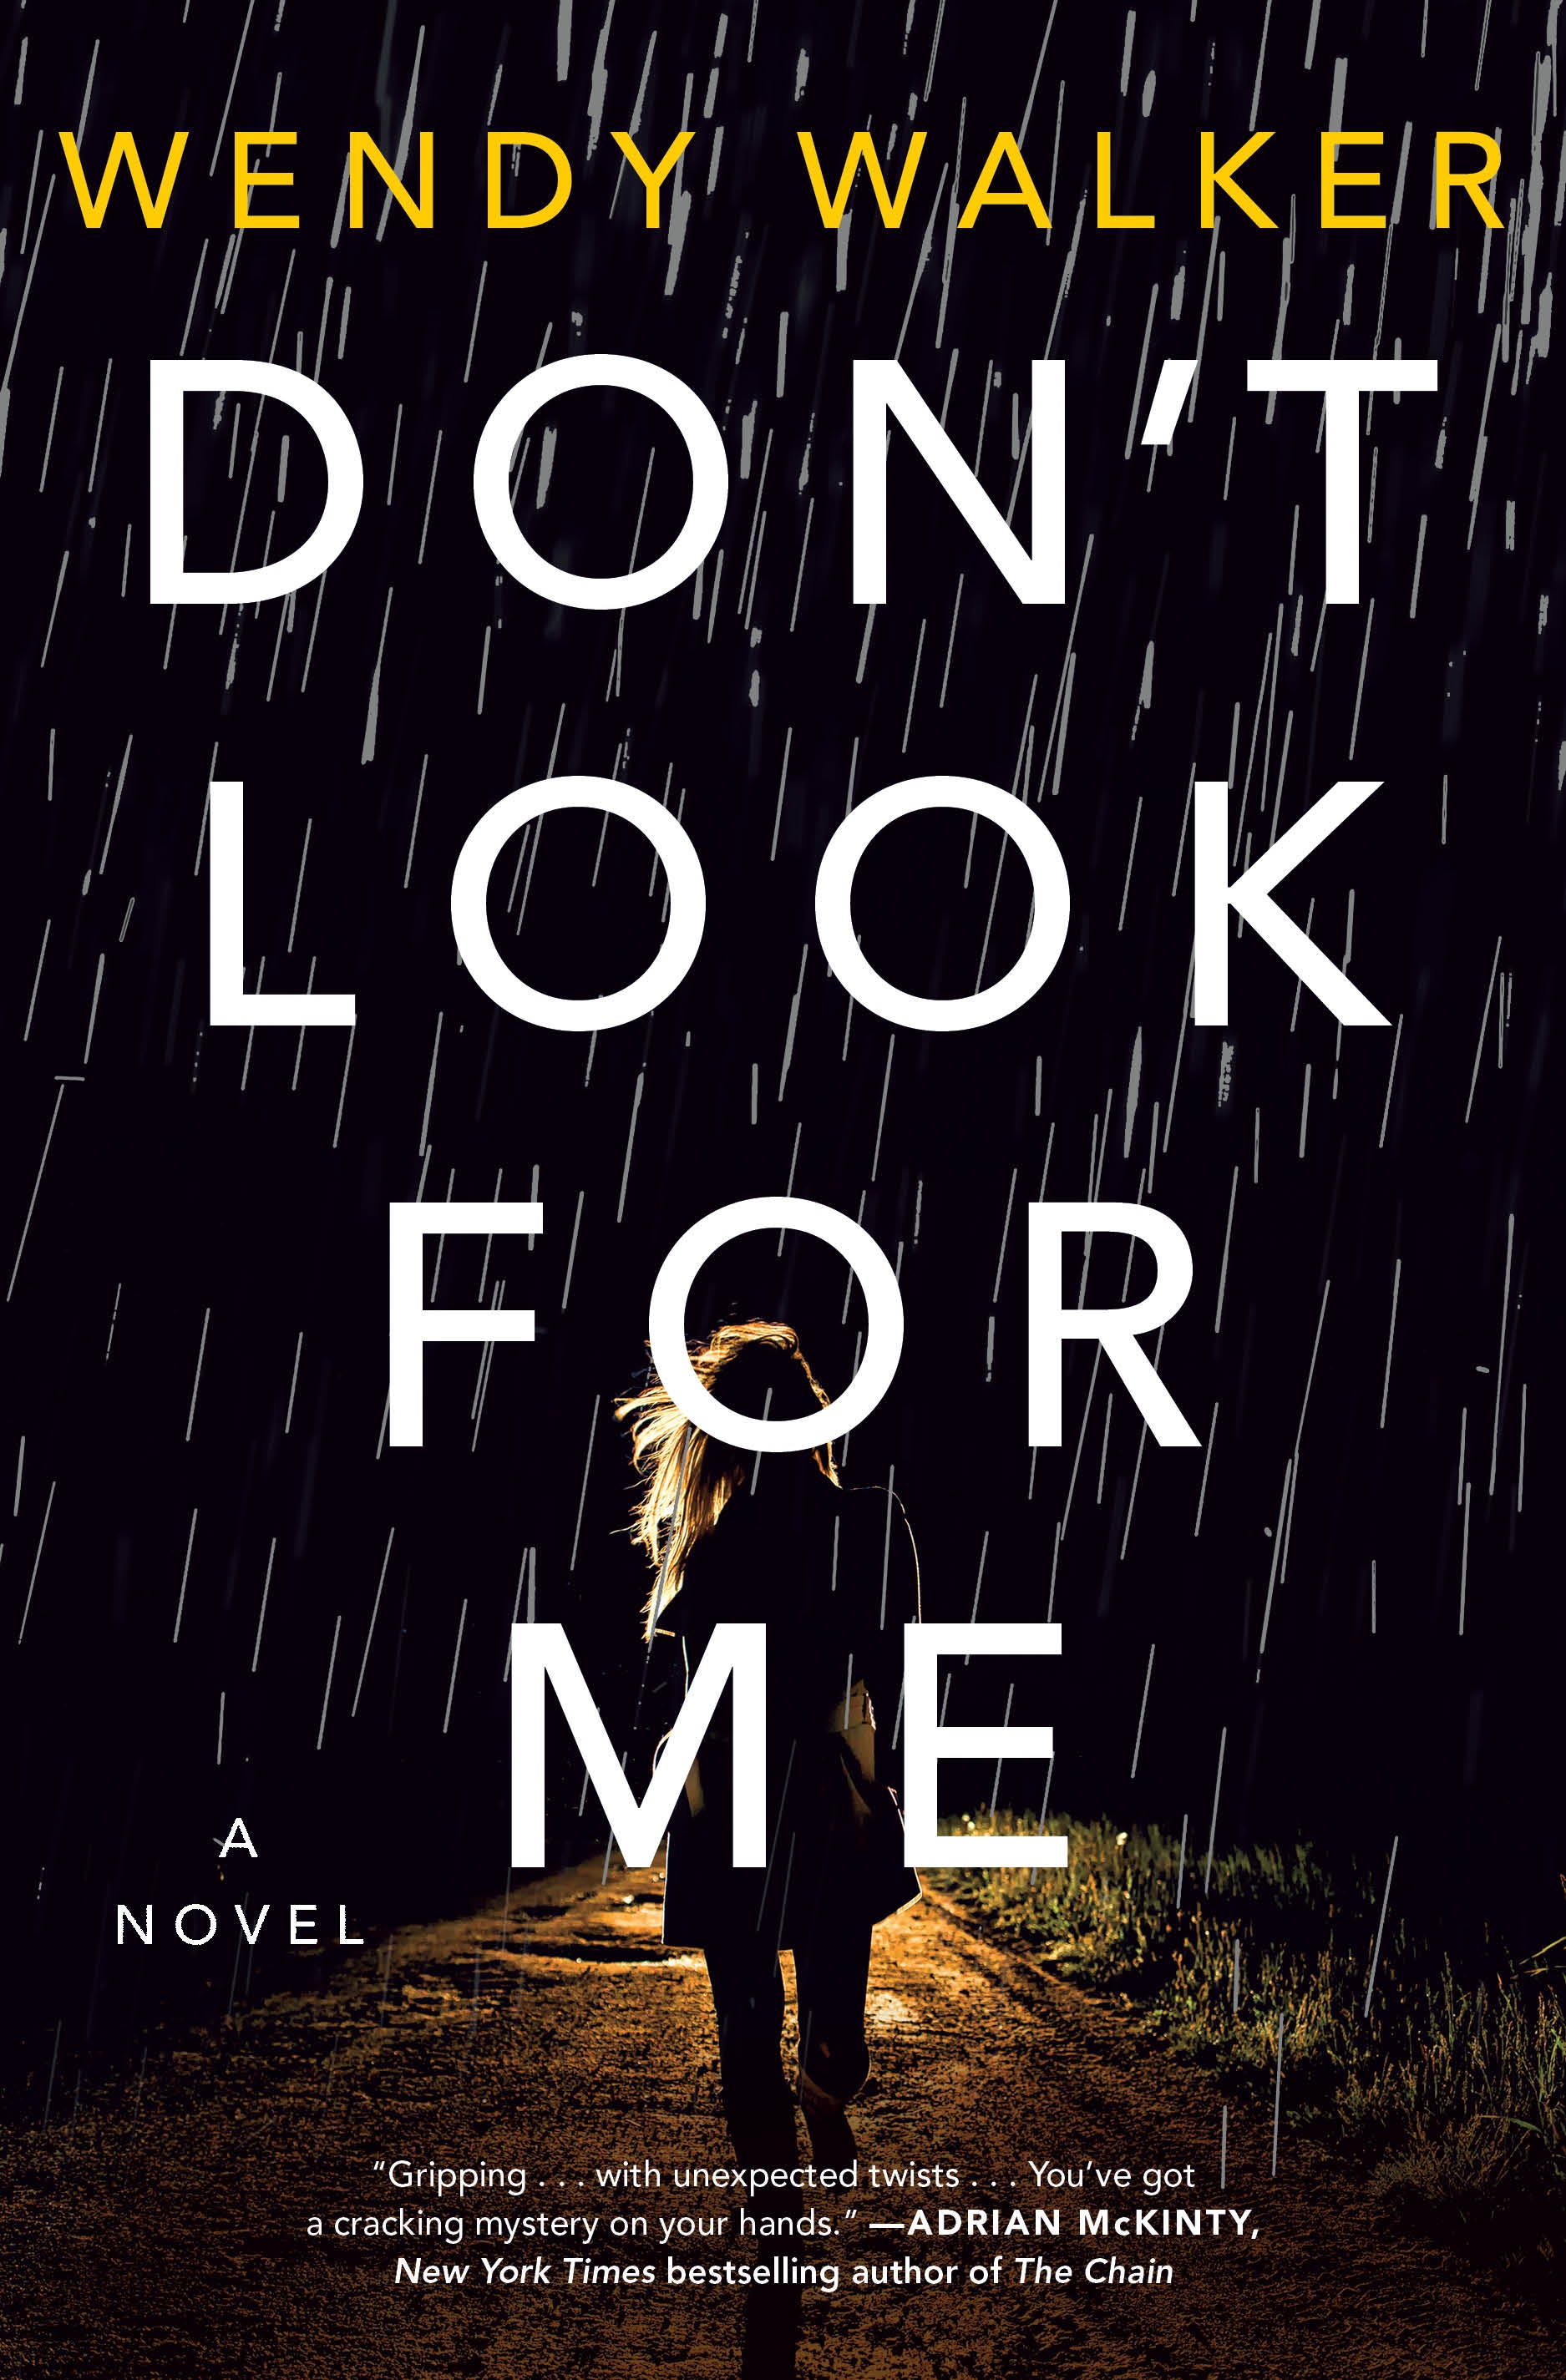 Book “Don't Look for Me” by Wendy Walker — September 15, 2020